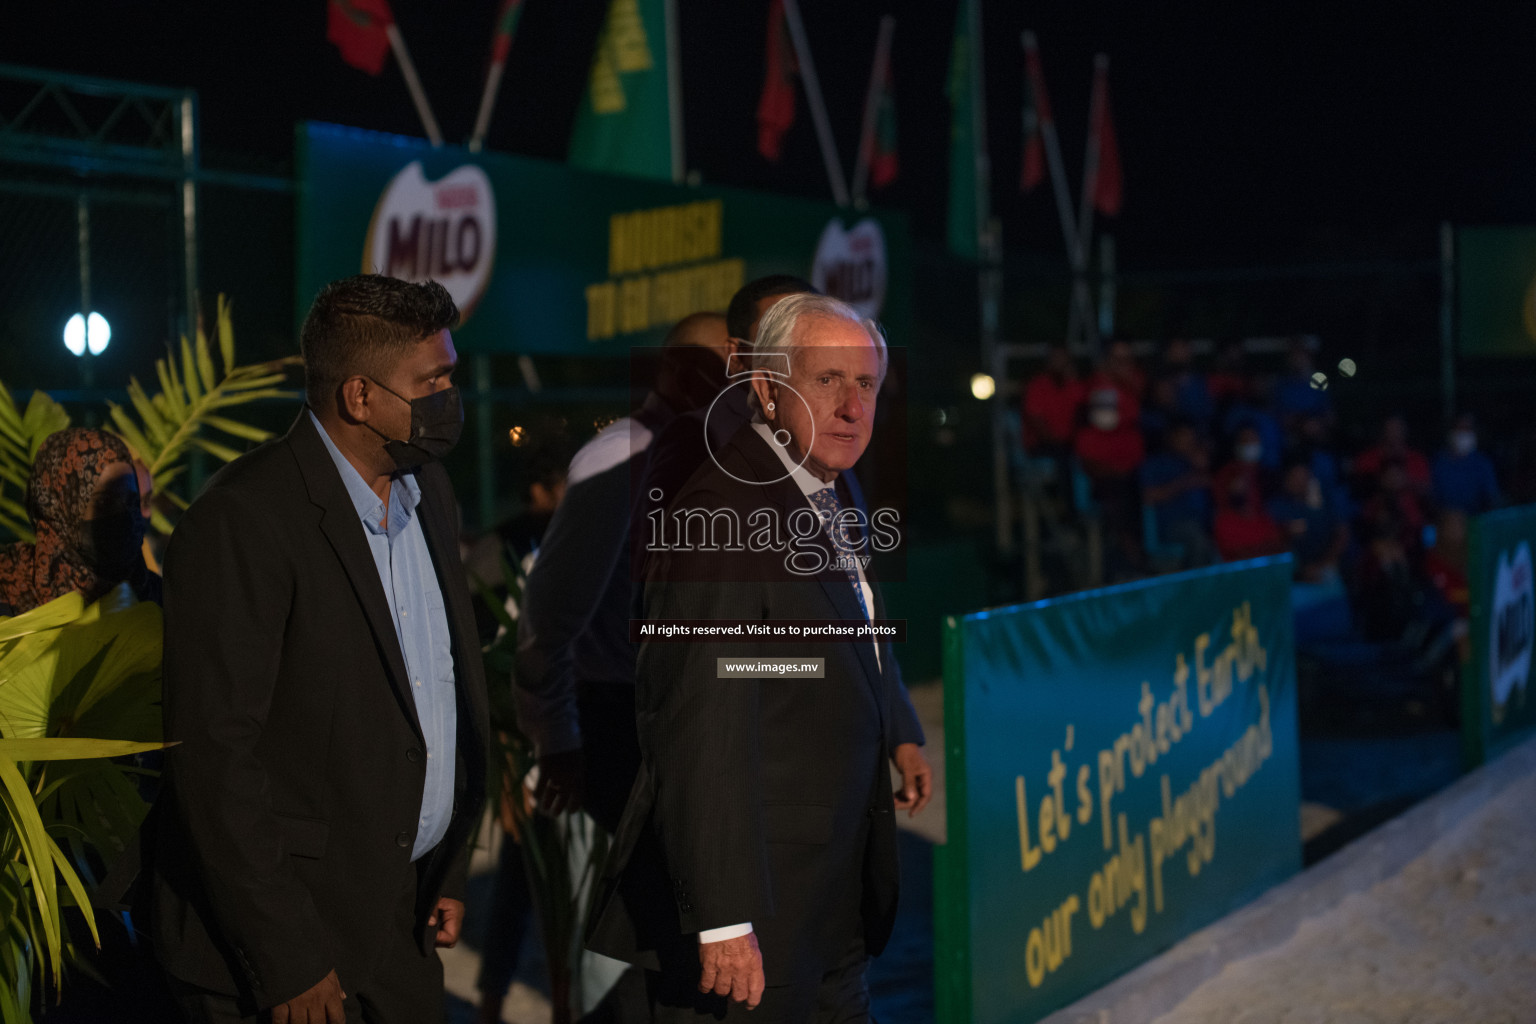 Ceremony to welcome FIVB President